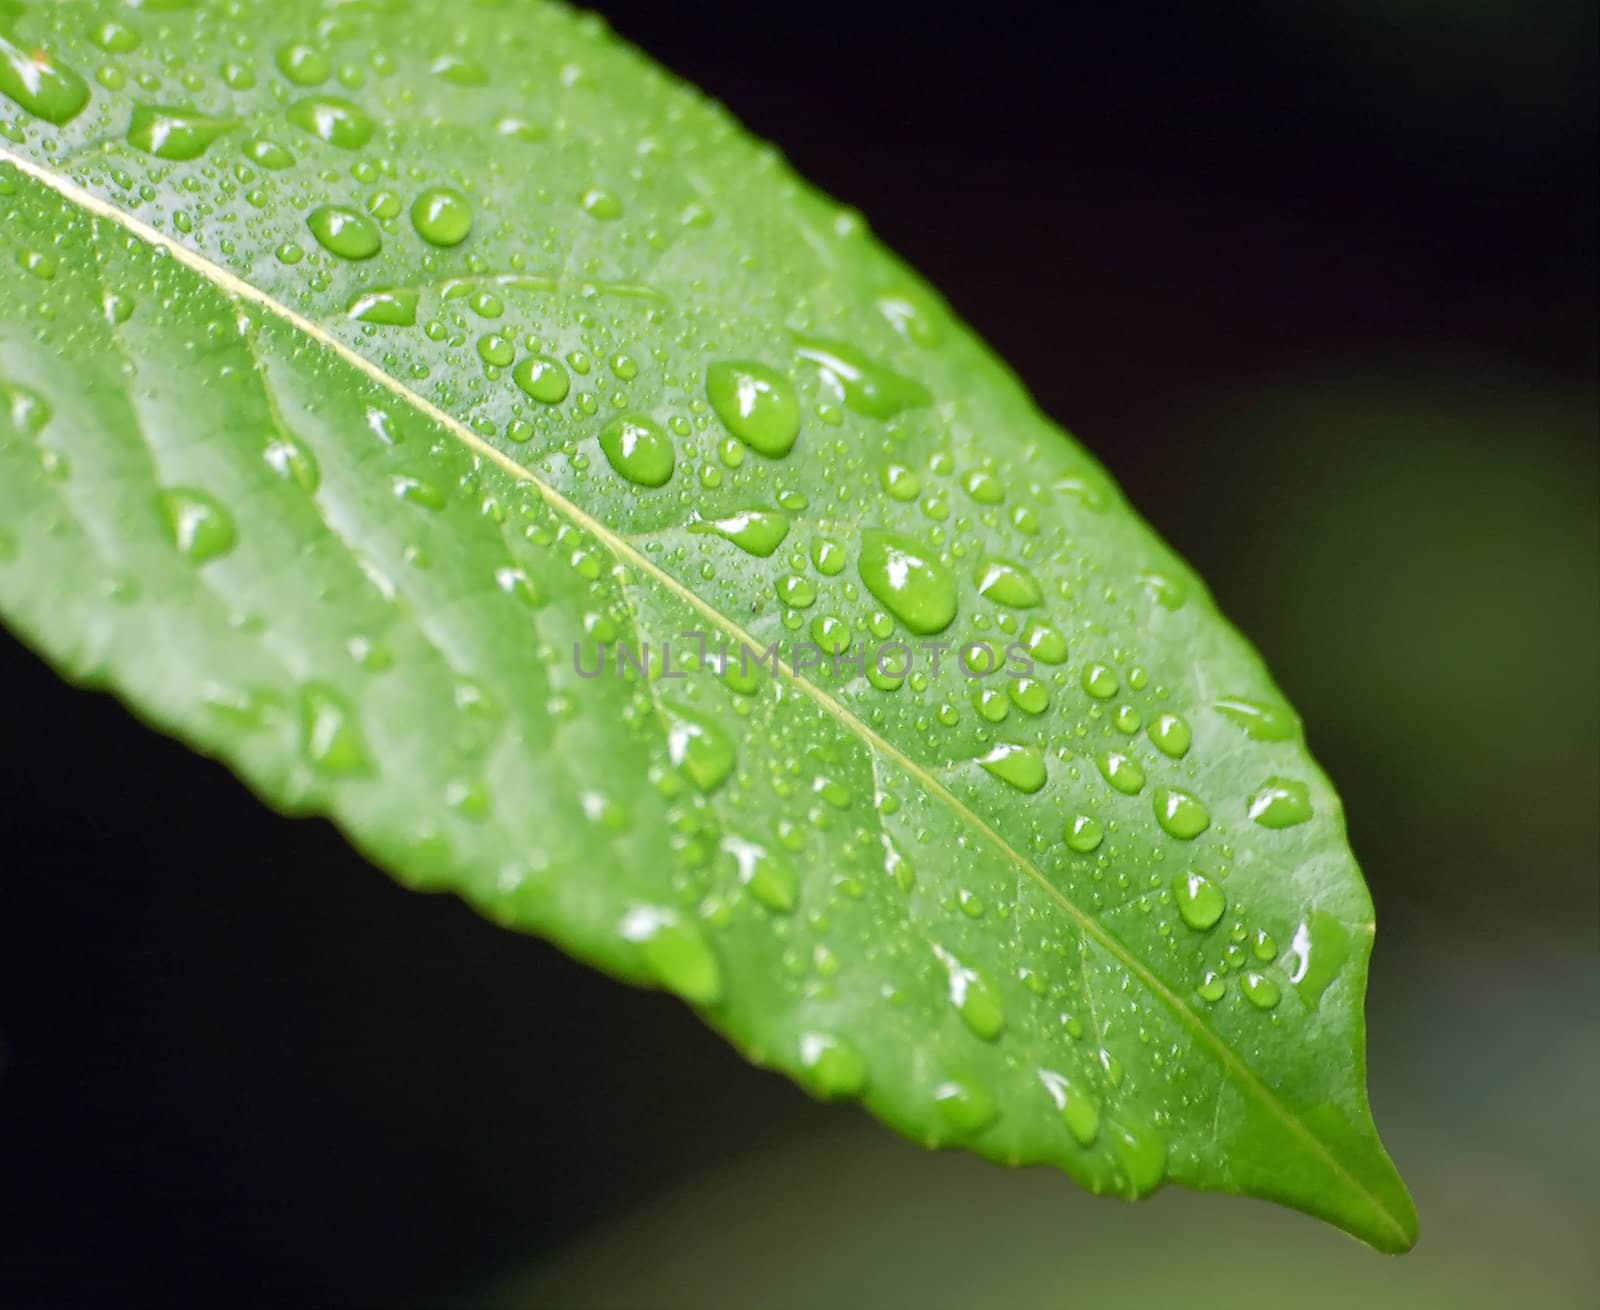 Close-up picture of some raindrops of a green leaf